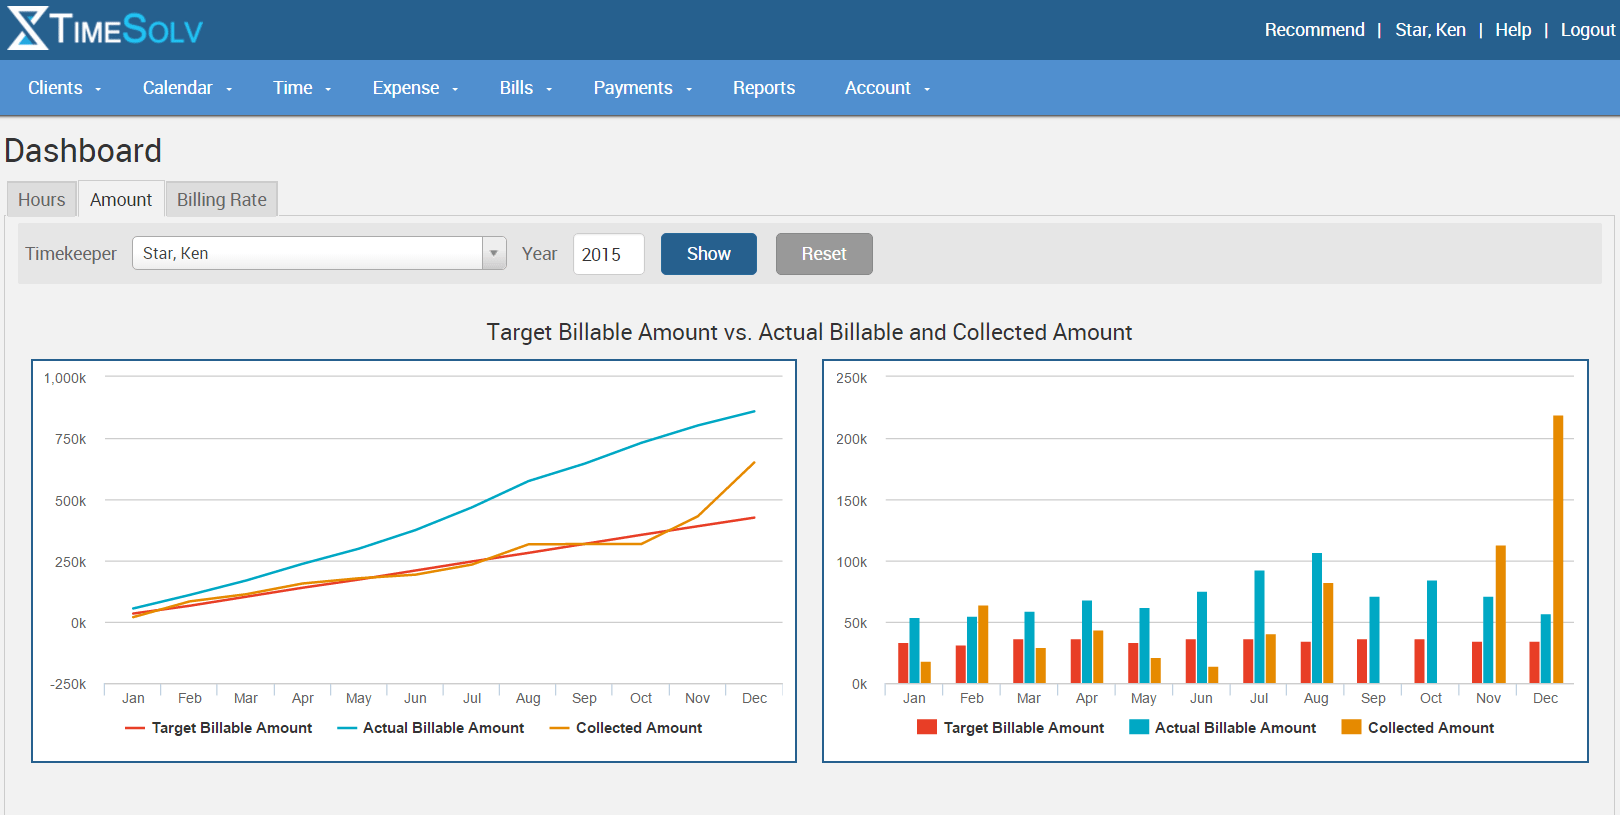 DASHBOARD VIEW OF TARGET BILLABLE AMOUNT VS. ACTUAL BILLABLE AND COLLECTED AMOUNT